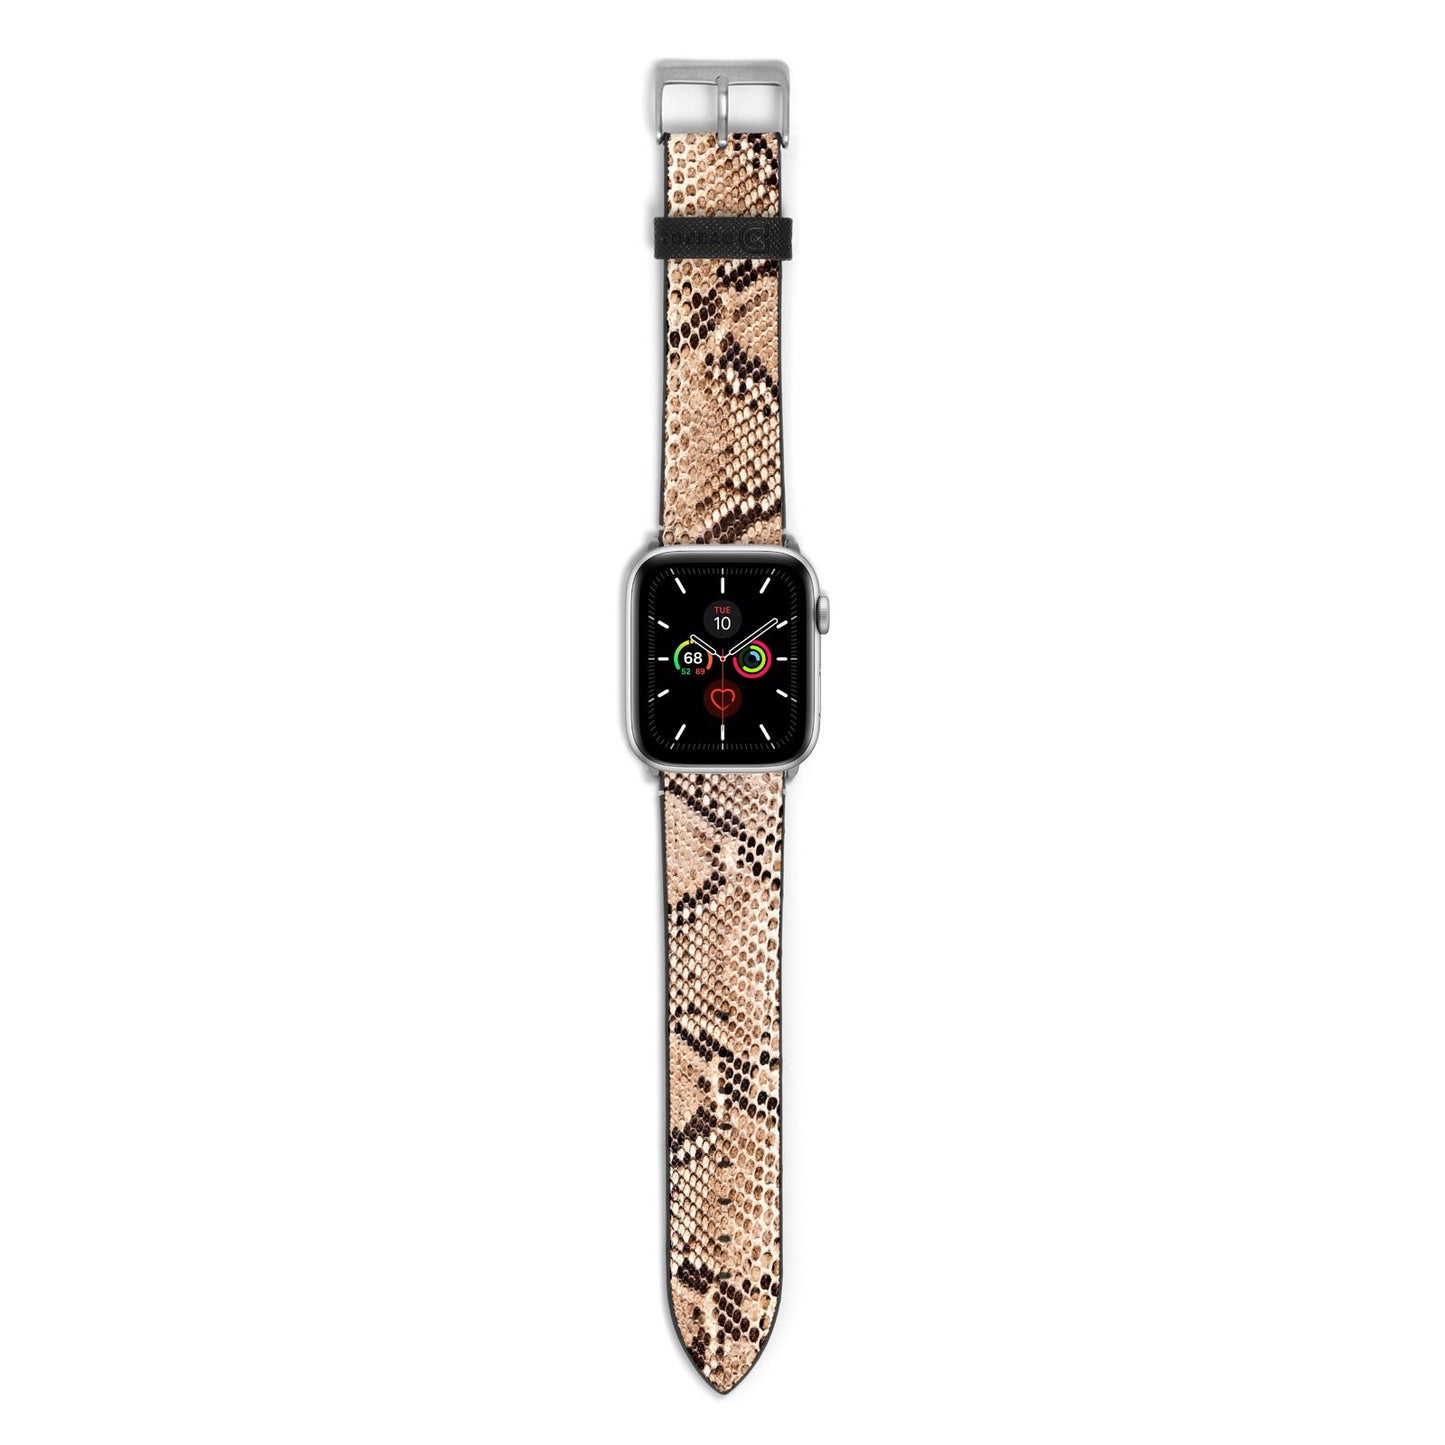 Snakeskin Apple Watch Strap with Silver Hardware